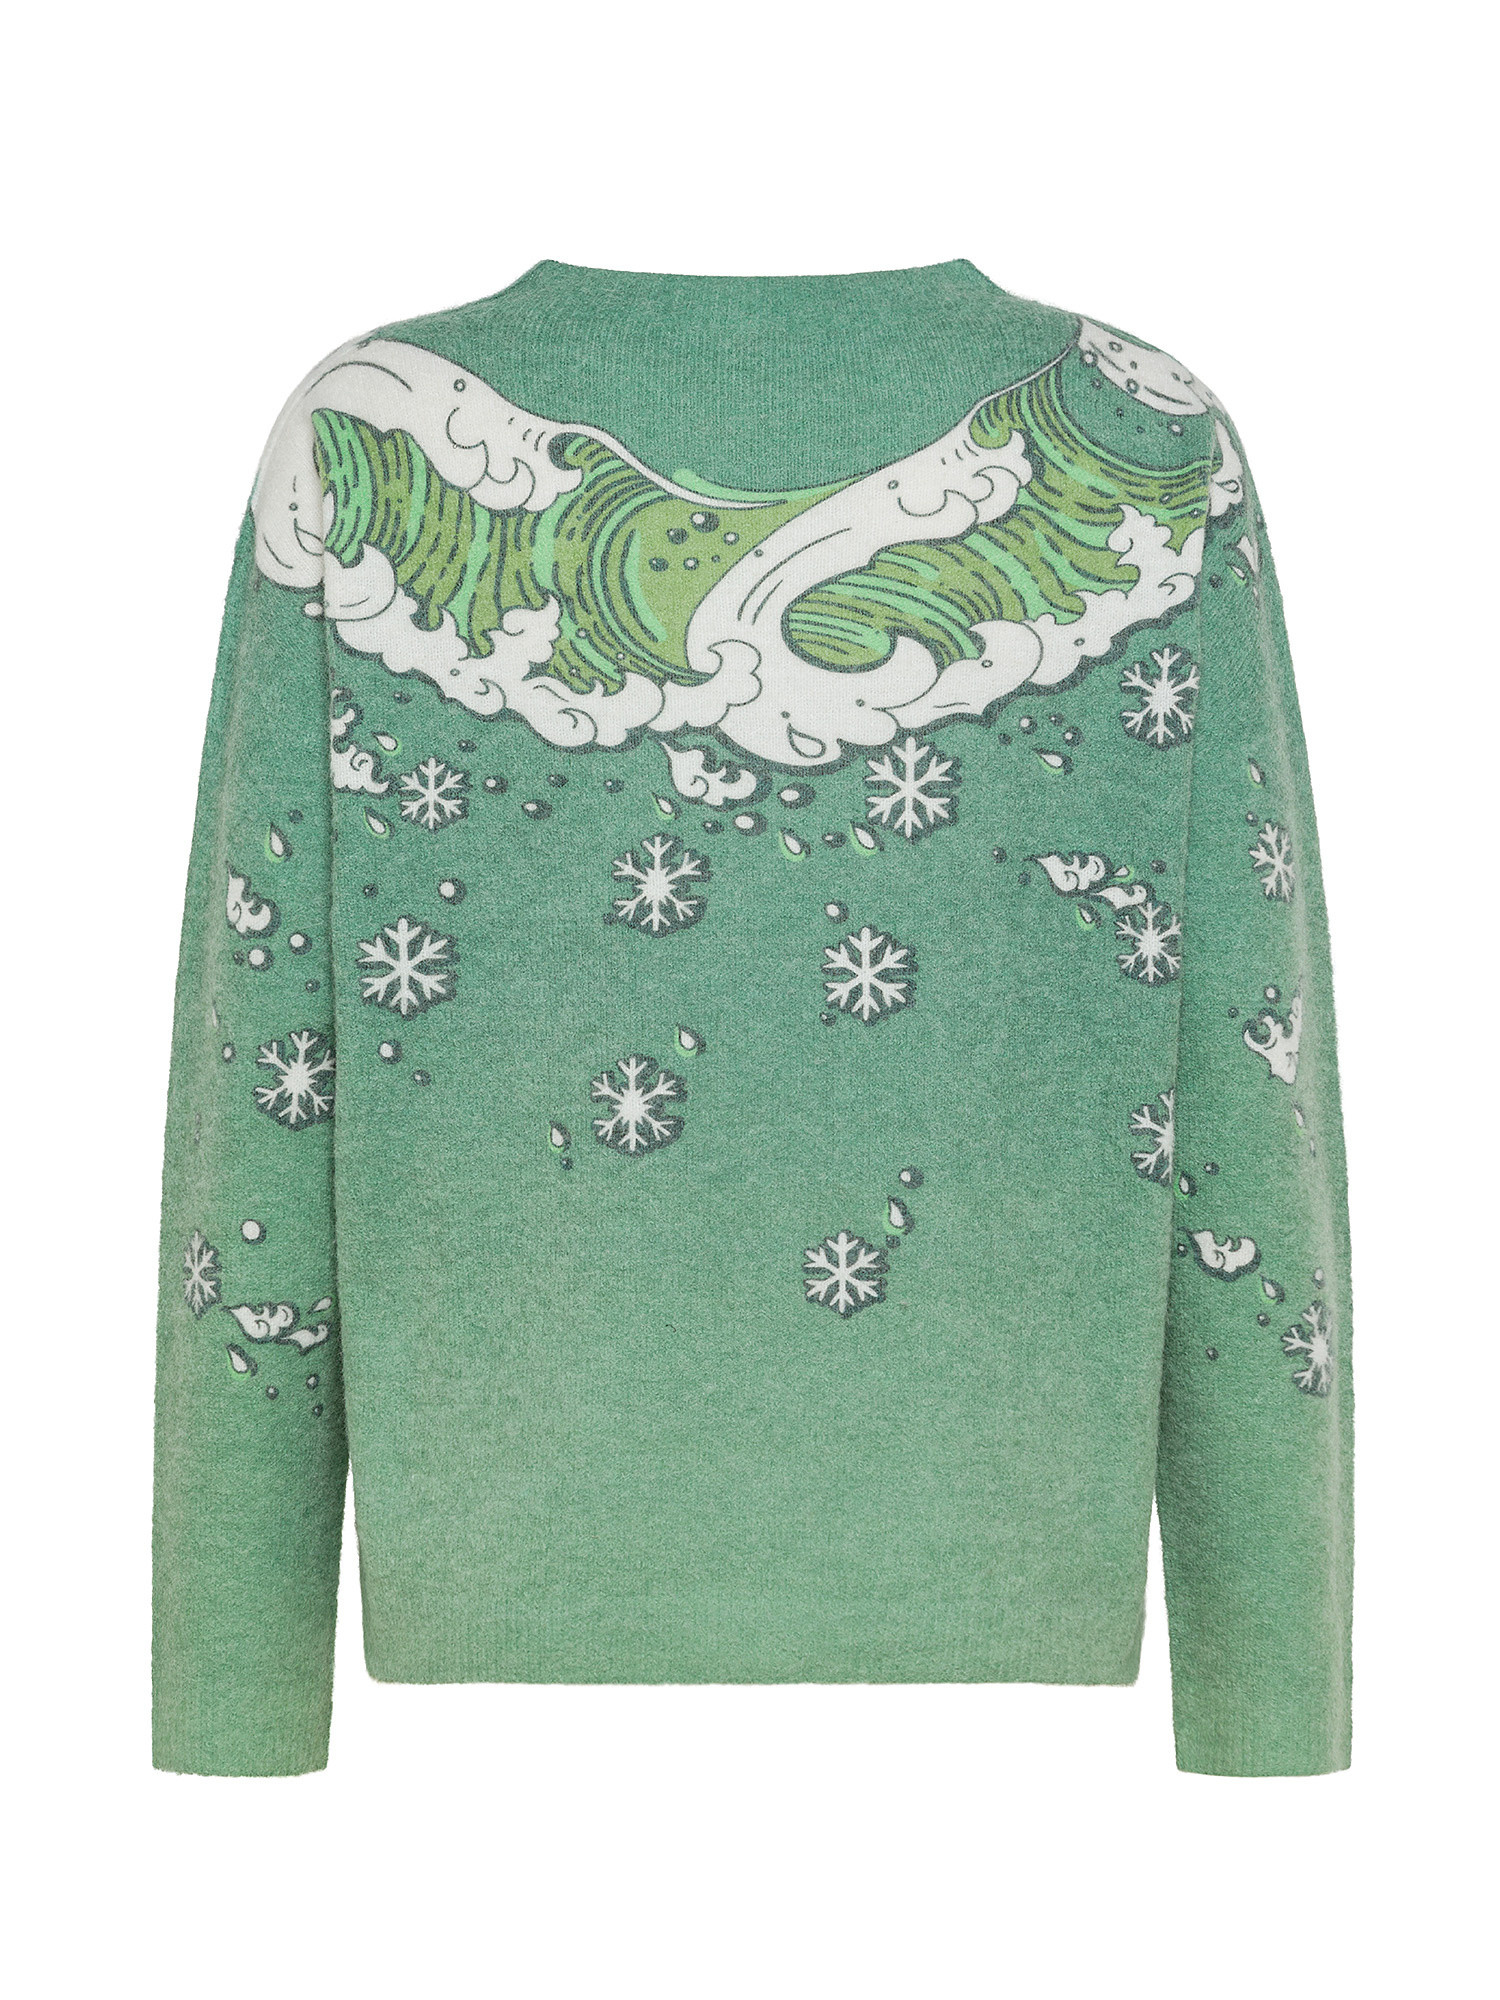 The Surfer's Christmas sweater by Paula Cademartori, , large image number 1